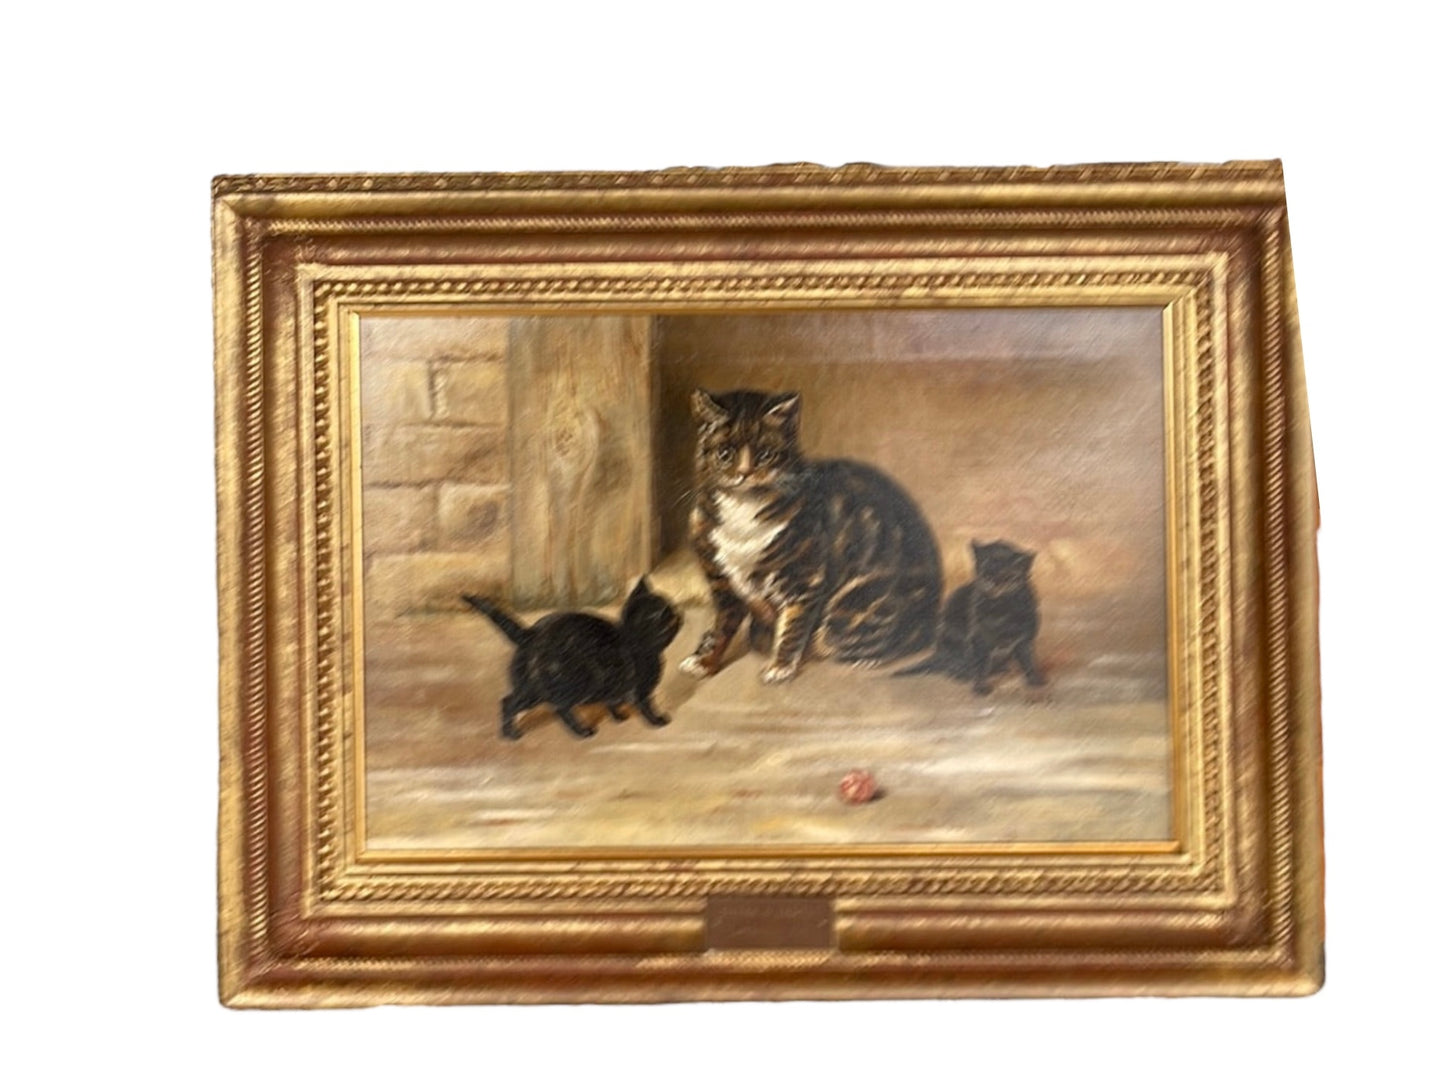 Oil on Canvas Cat with Kittens and Ball: "Sheba and Family"